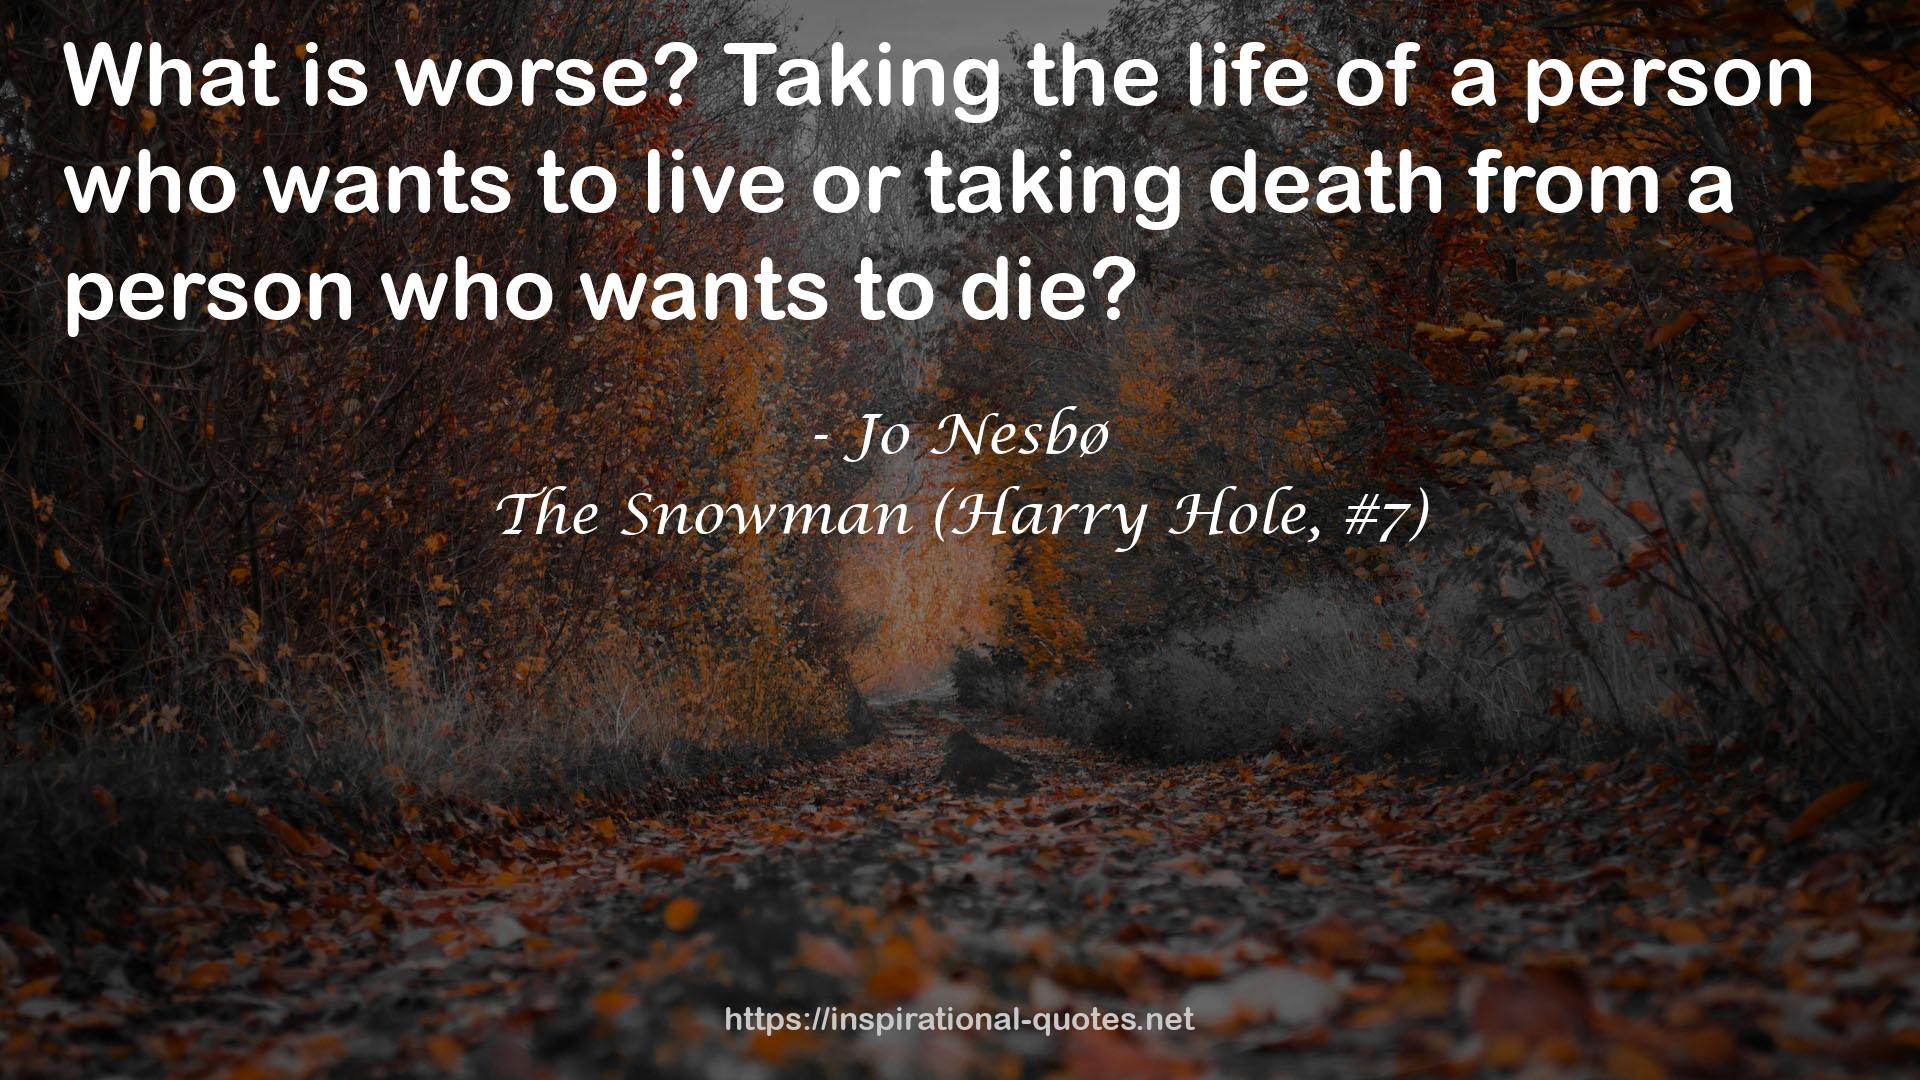 The Snowman (Harry Hole, #7) QUOTES